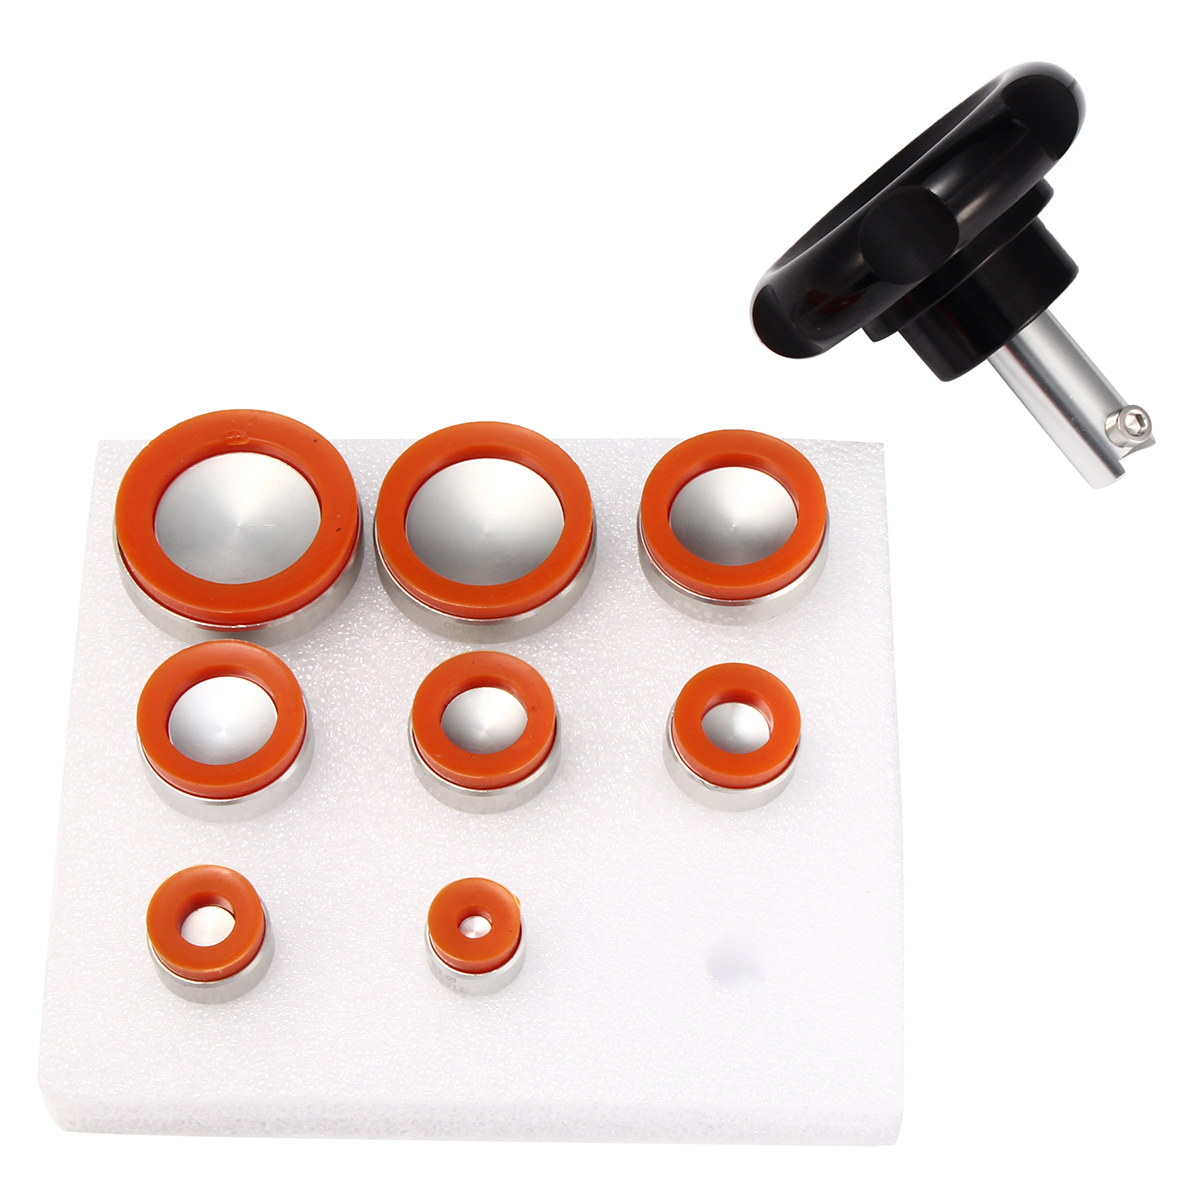 

Watch Case Opener With 8Pcs Suction Dies Tools Repair for Screw Back Cases